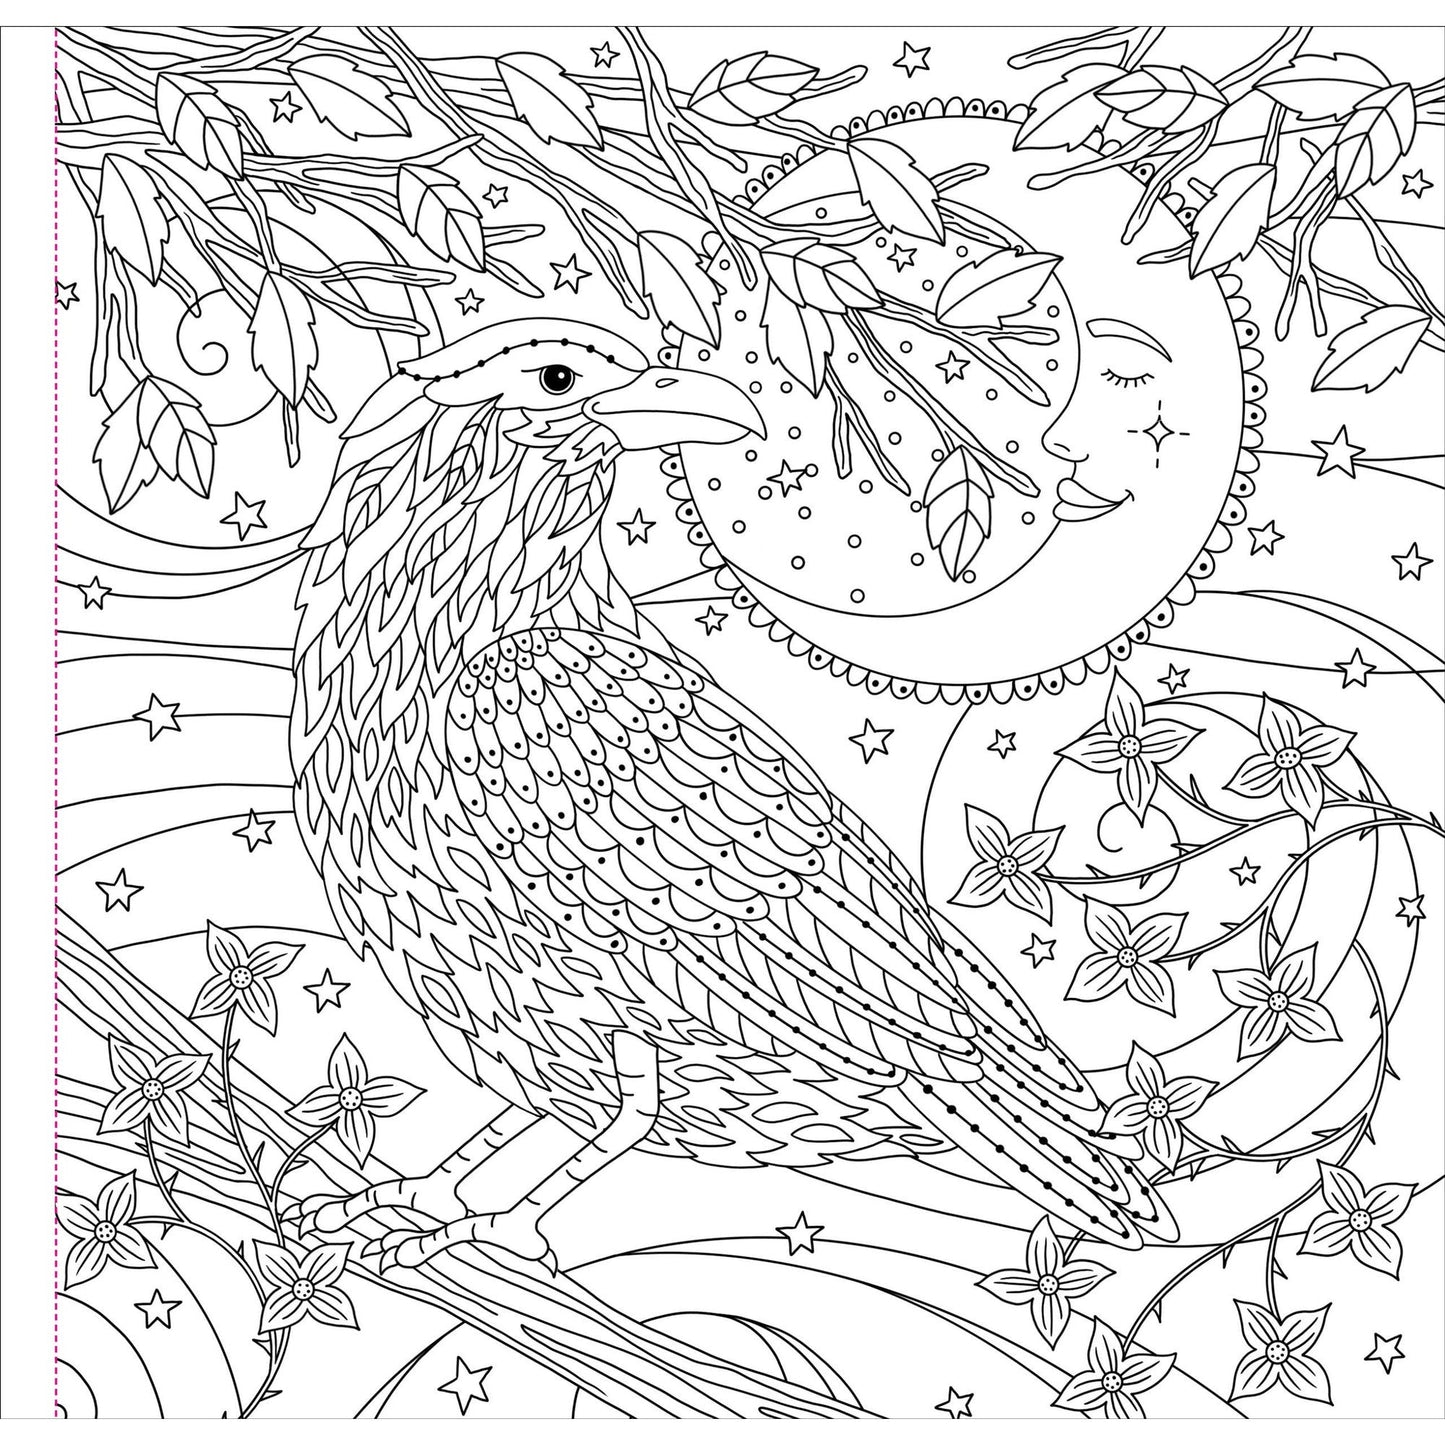 Witchcraft & Wonder Coloring Book | 31 Enchanting Mystical Illustrations Art Book